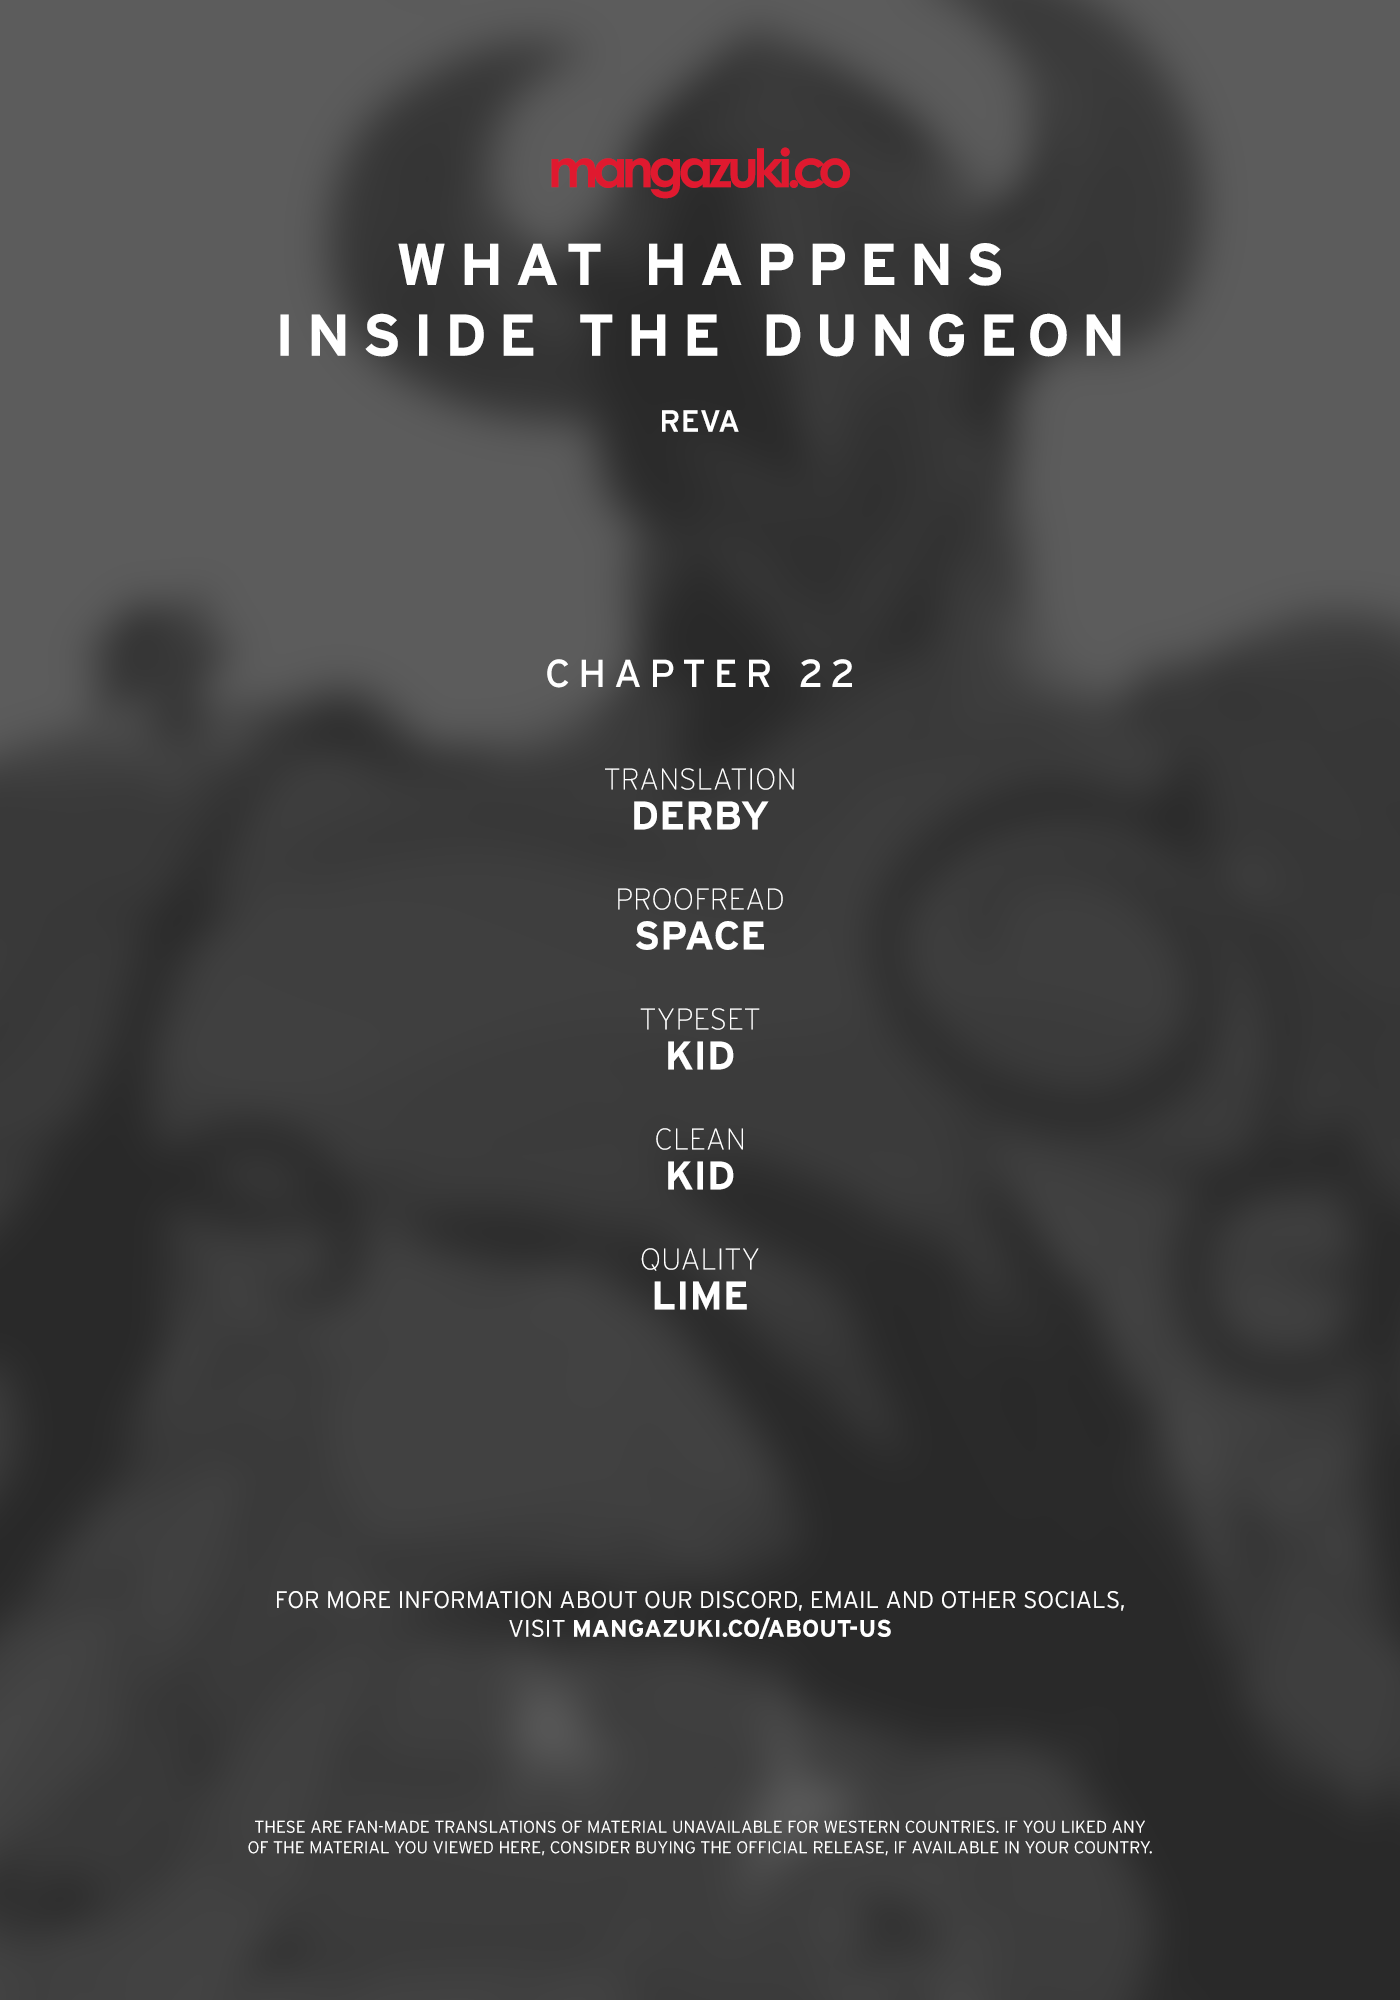 What Happens Inside the Dungeon - Chapter 33680 - Image 1